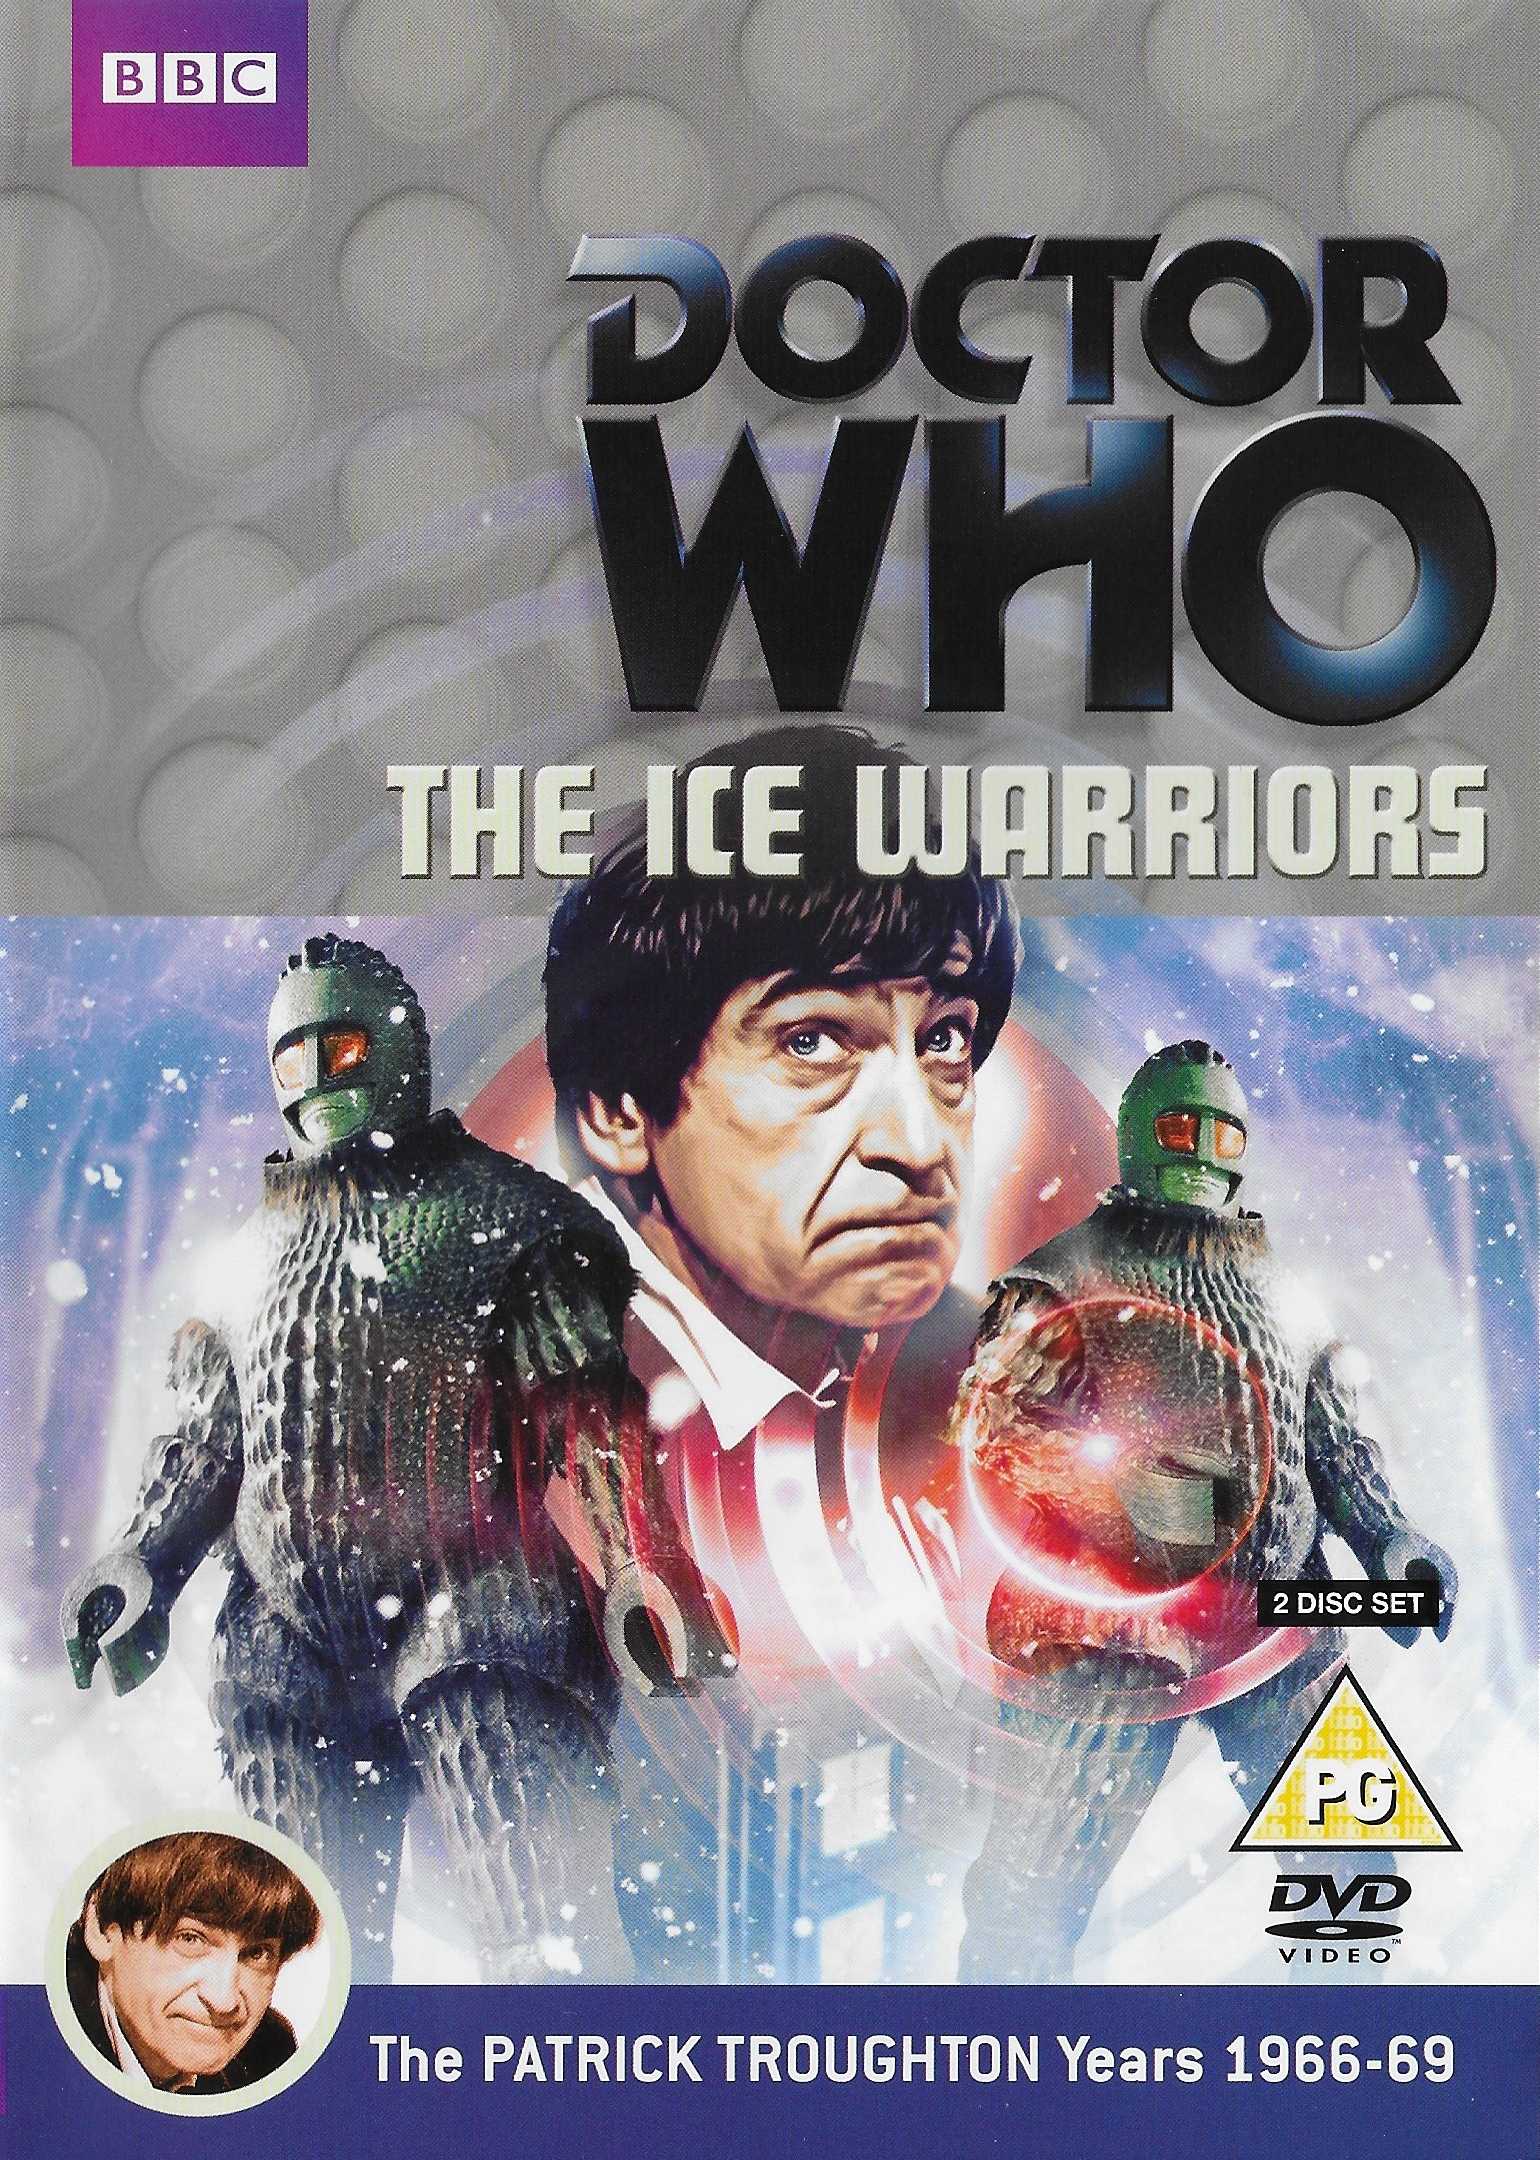 Picture of BBCDVD 3558 Doctor Who - The ice warriors by artist Brian Hayles from the BBC dvds - Records and Tapes library